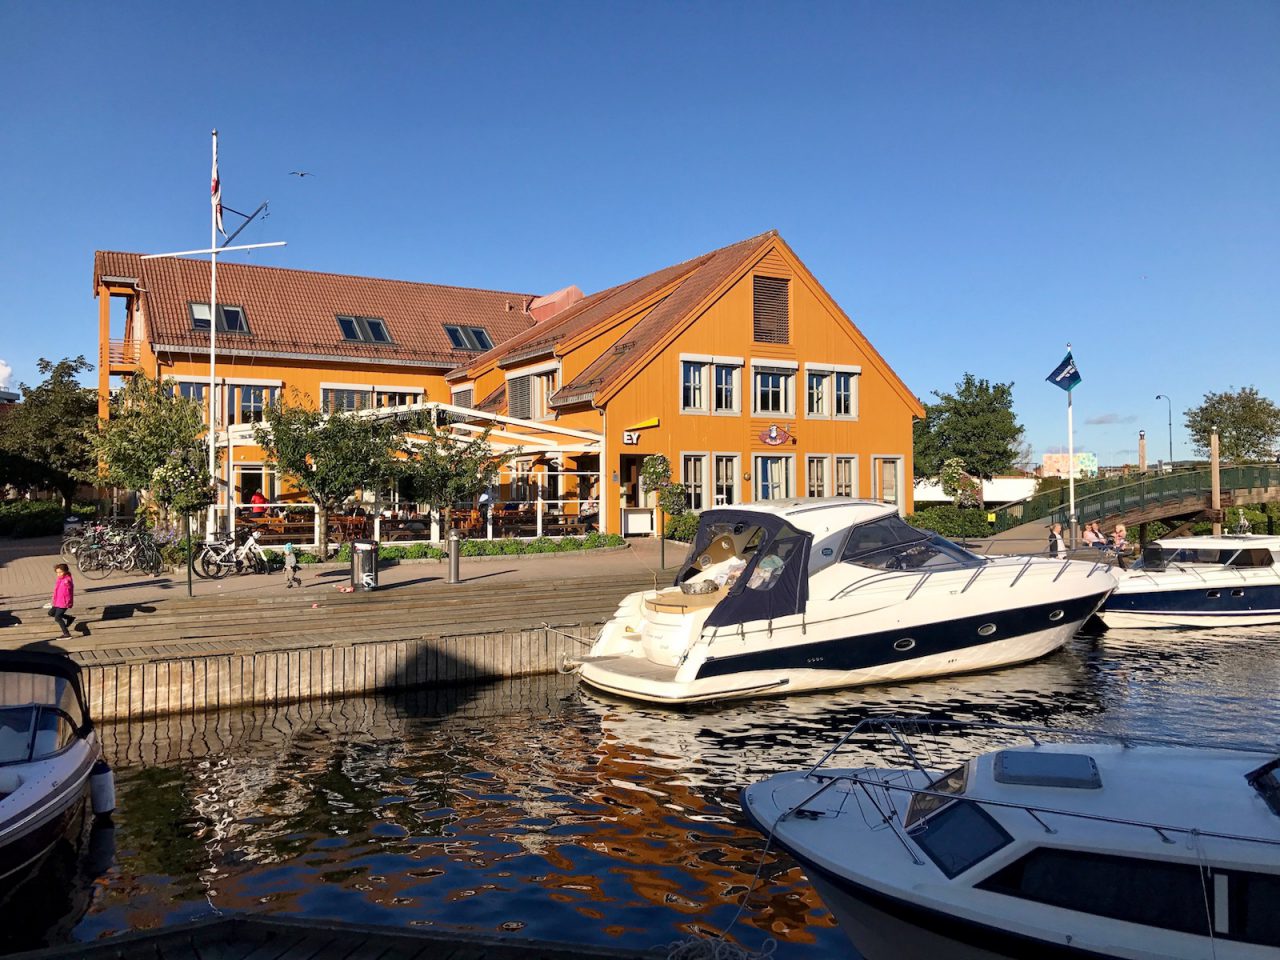 The town center of Kristiansand, Norway